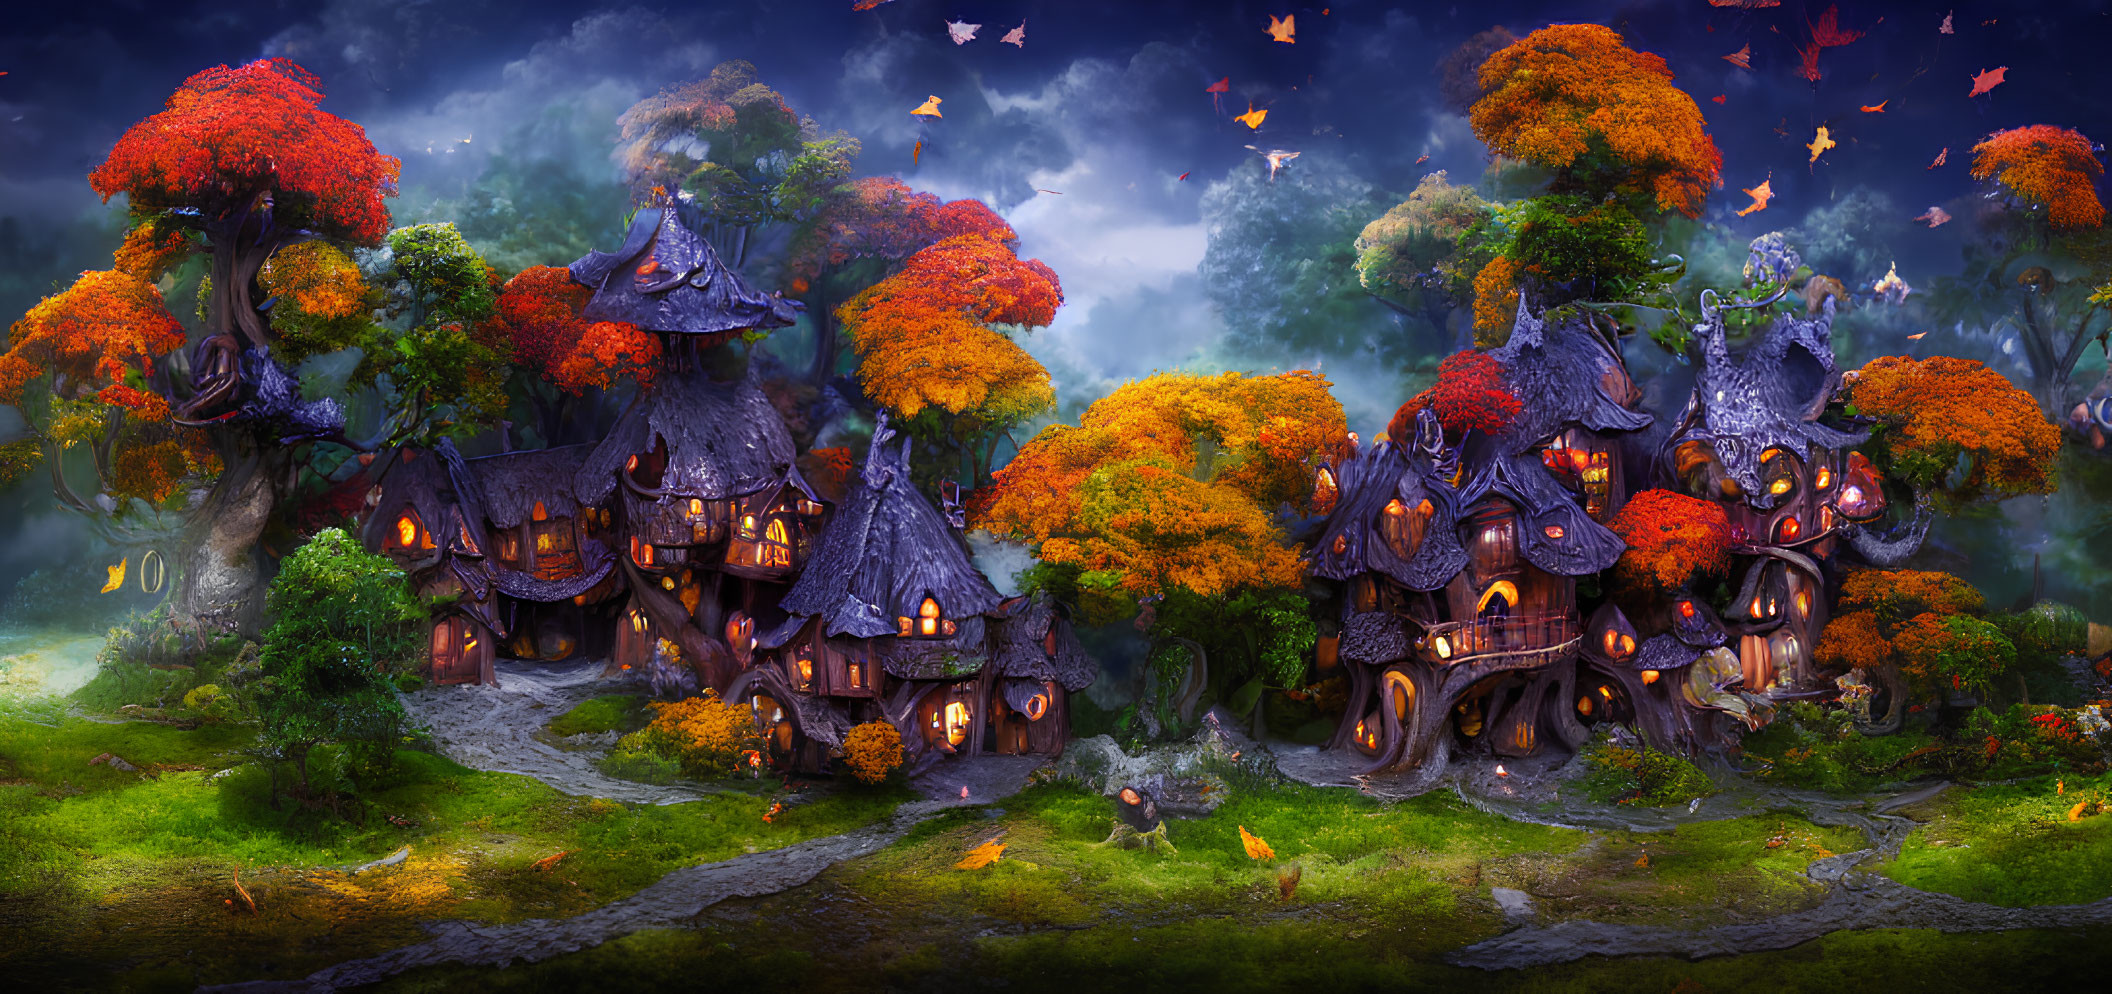 Whimsical mushroom houses in autumnal forest with magical glow